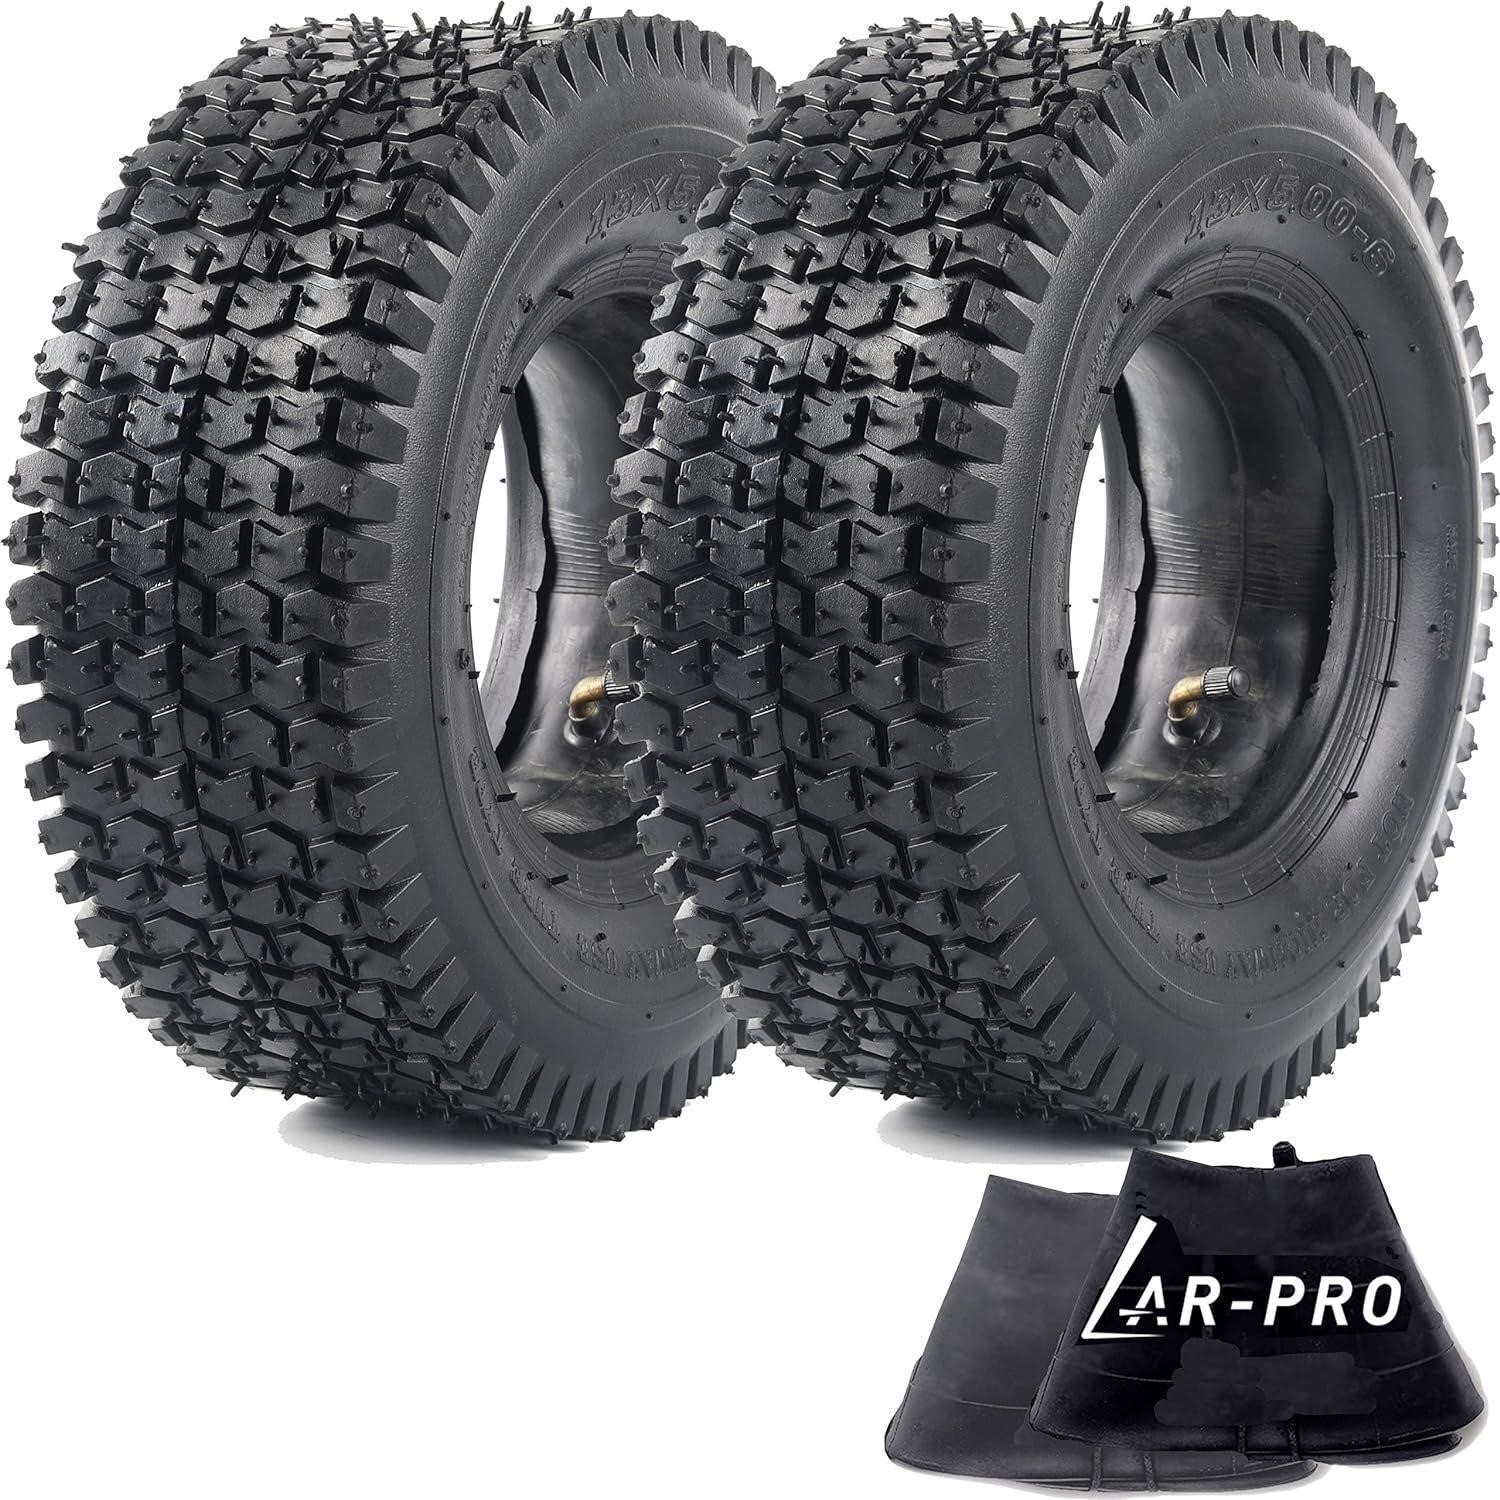 AR-PRO Replacement 13x5.00-6 Tire